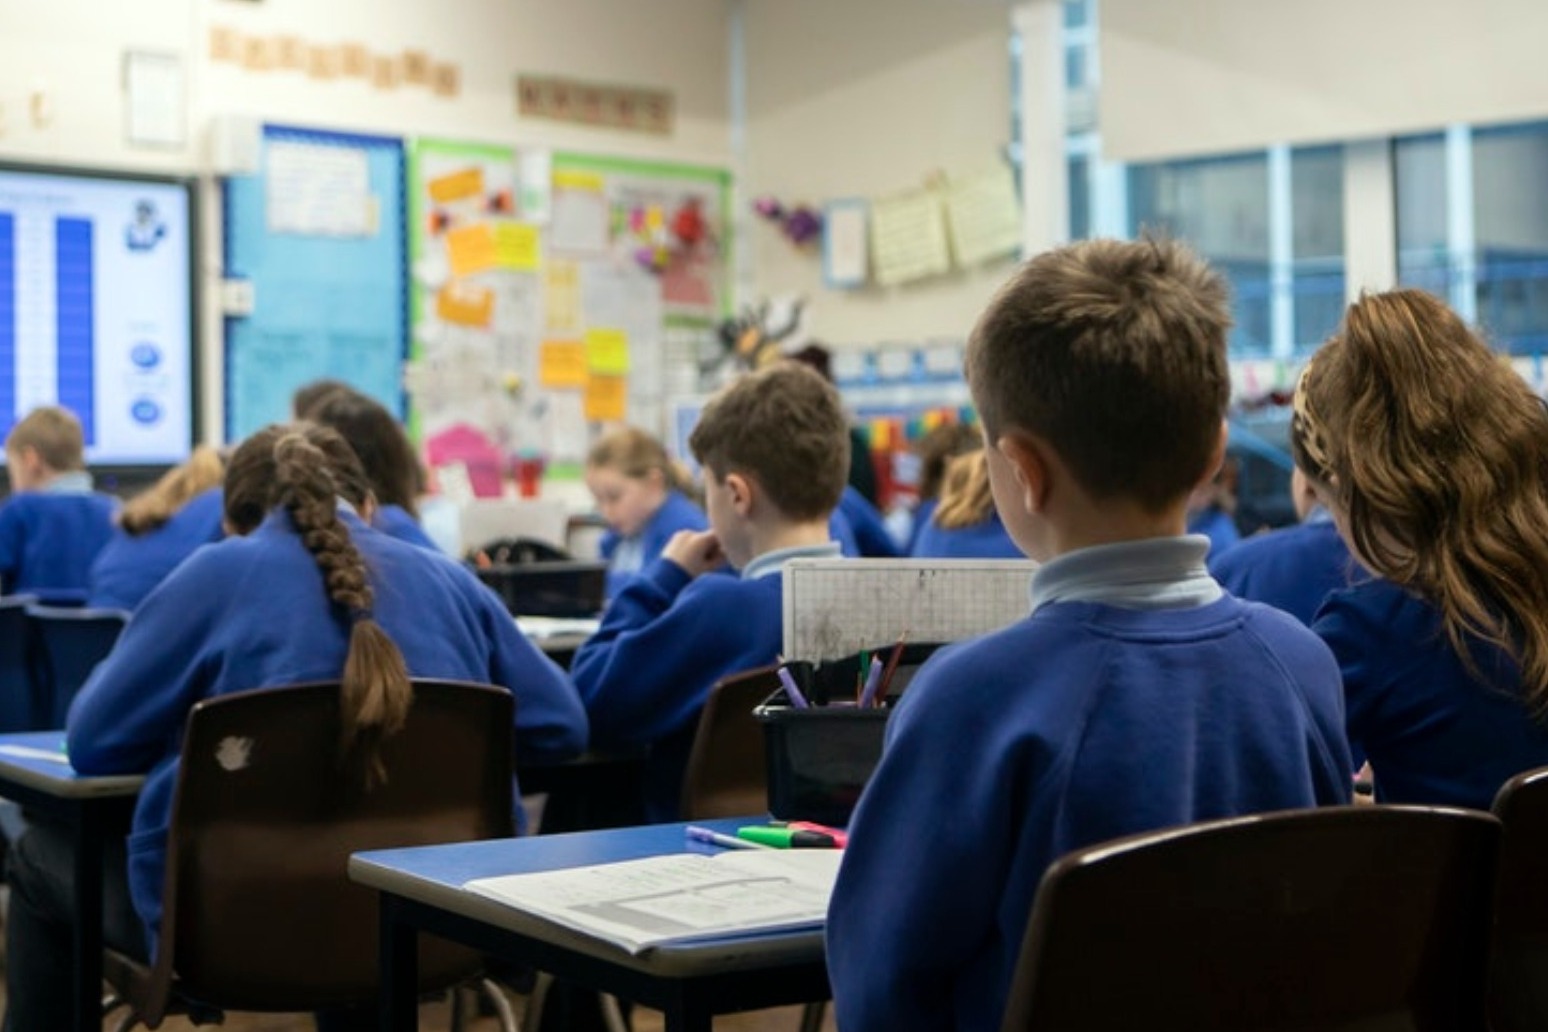 Decision on full-time return for schools in Scotland to be announced 